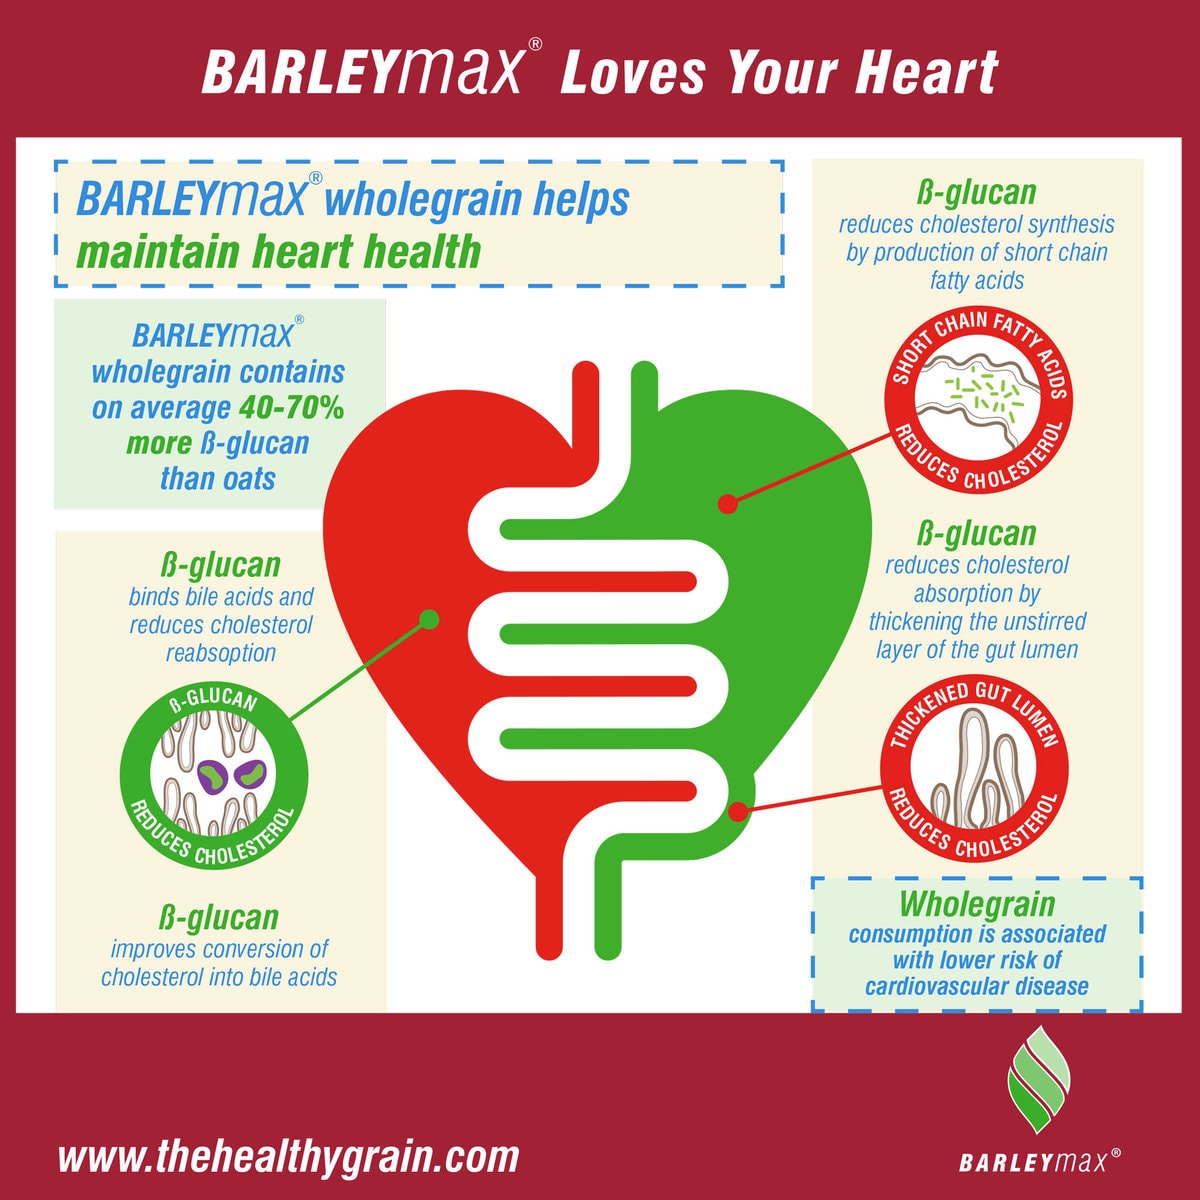 Infographic - BARLEYmax loves your heart